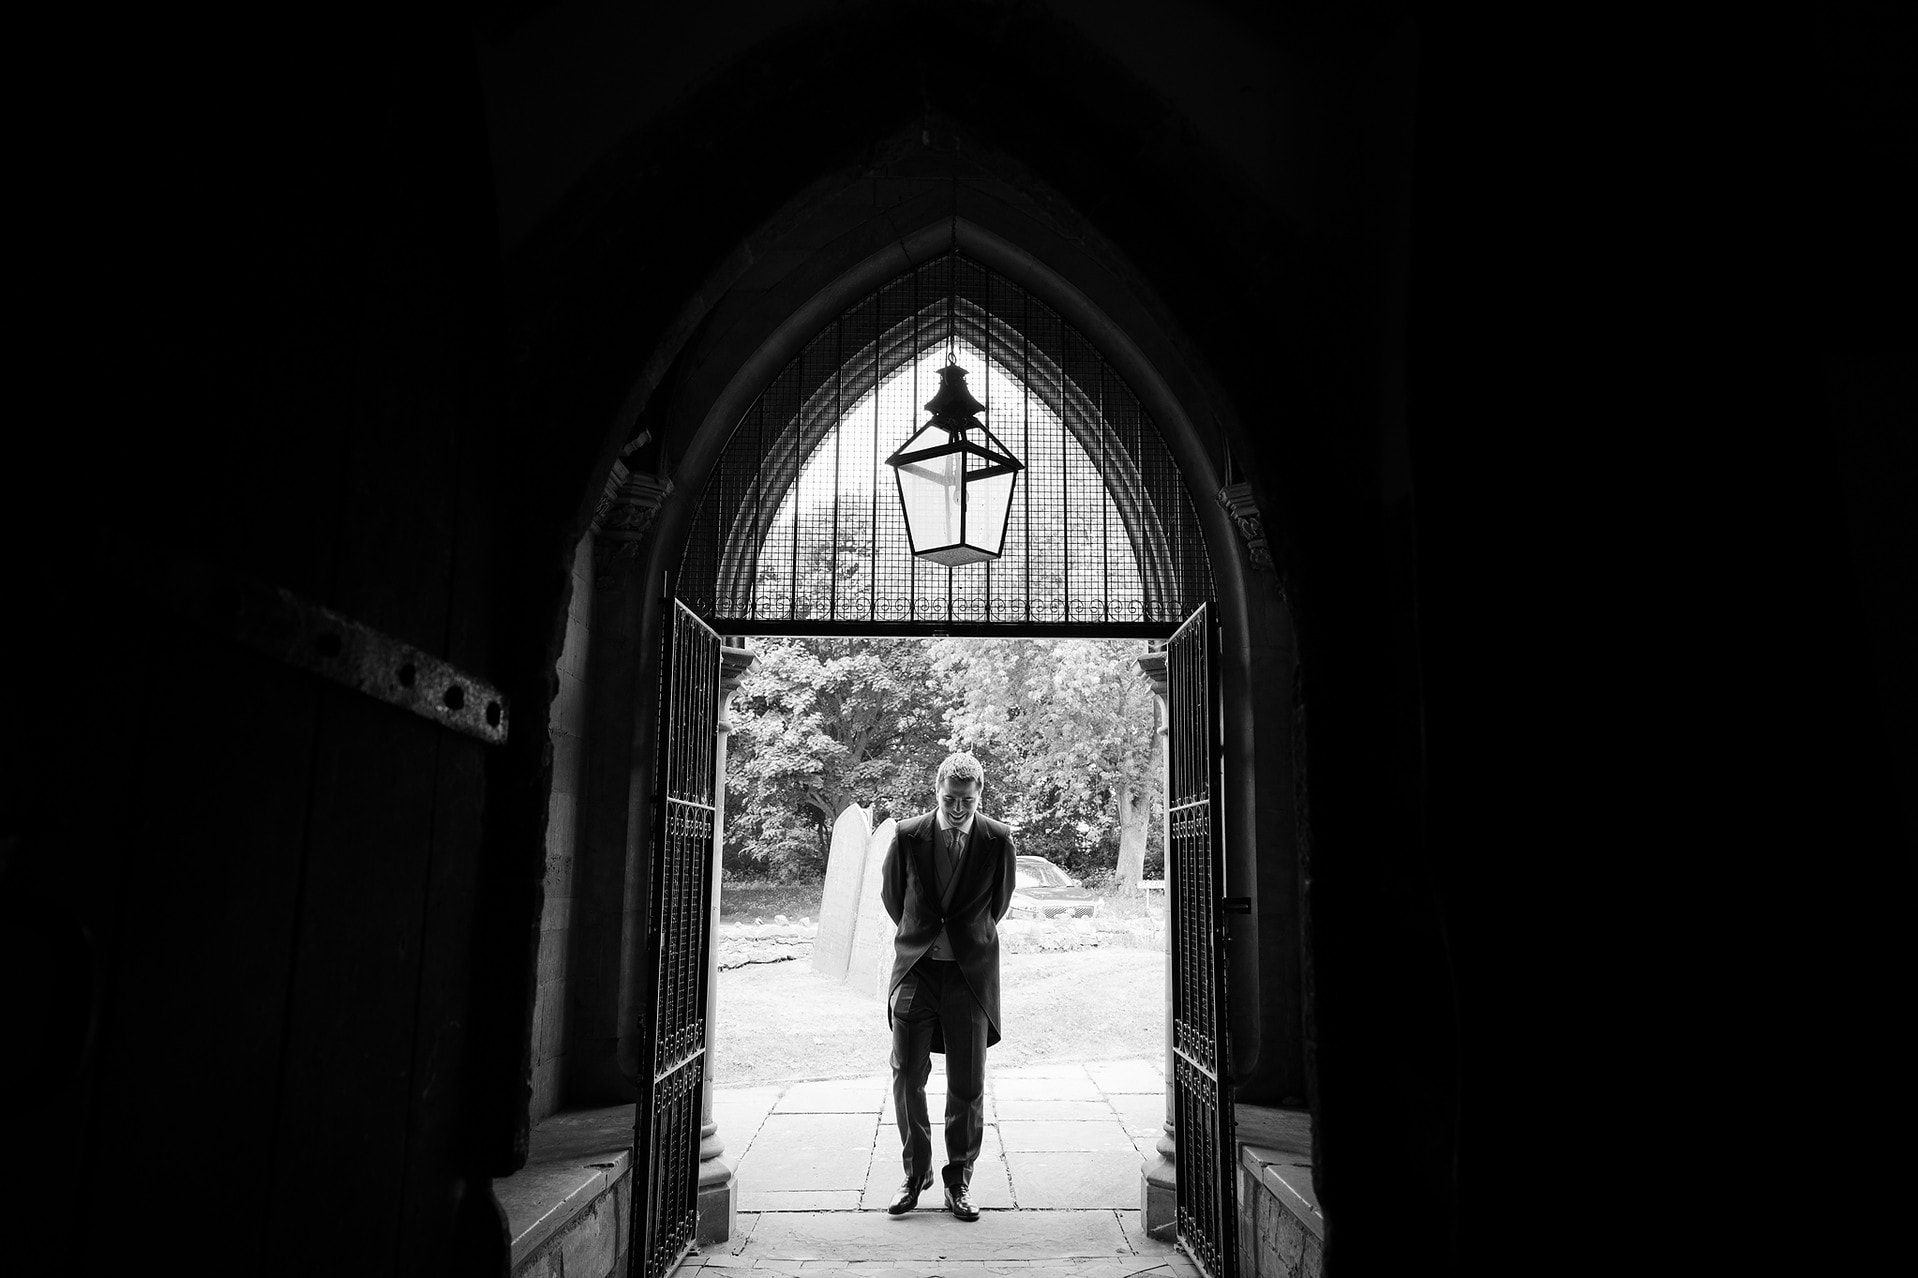 A silhouette of the groom standing in the church doorway waiting for guests to arrive